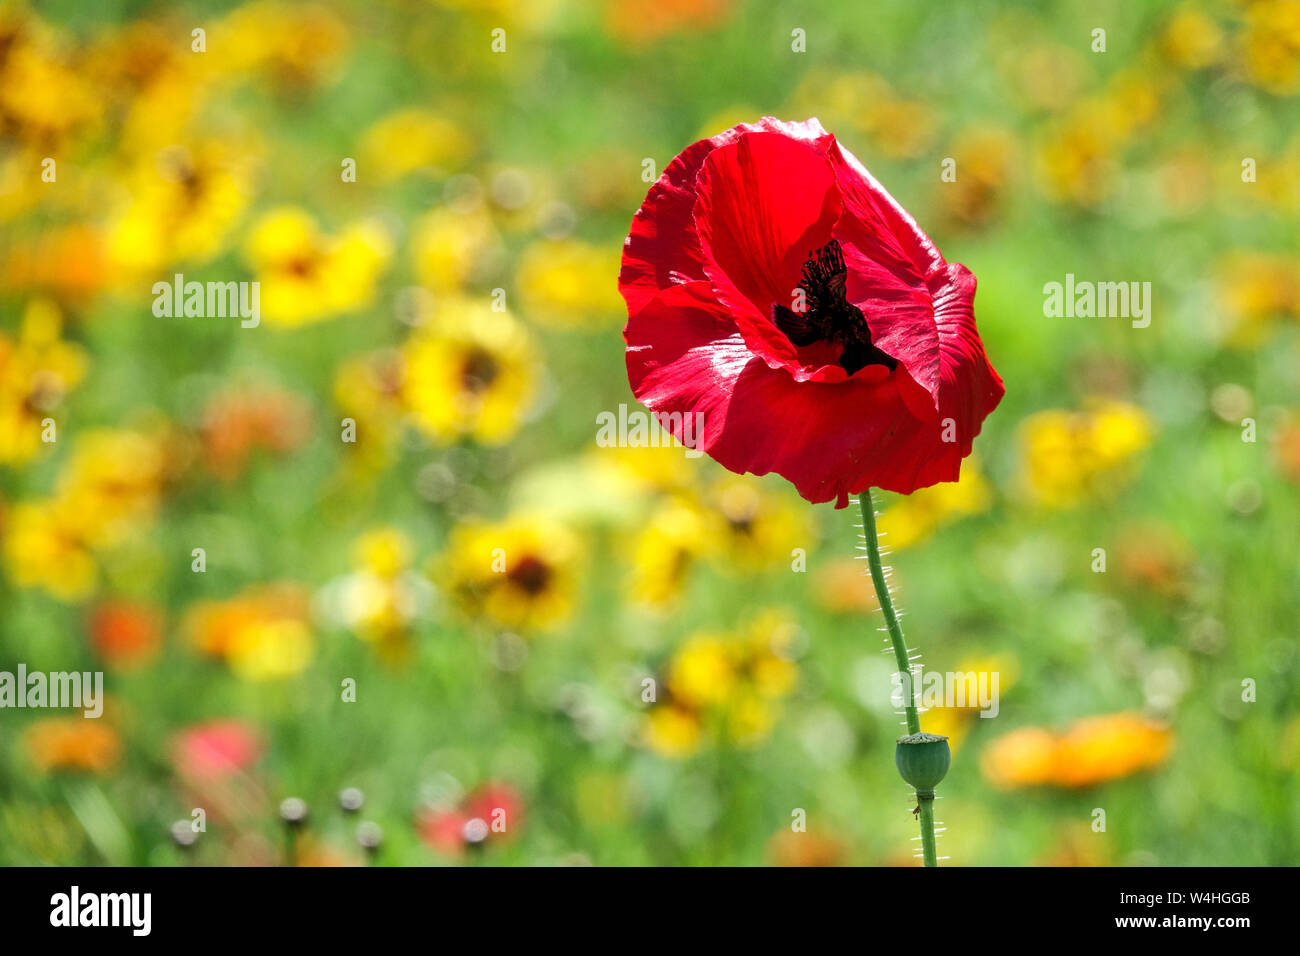 Red yellow Combination Flowers Blurred Background Summer Garden Meadow Red poppy Flower Single Wild Flower Garden Field Poppy Wildflower Papaver Stock Photo